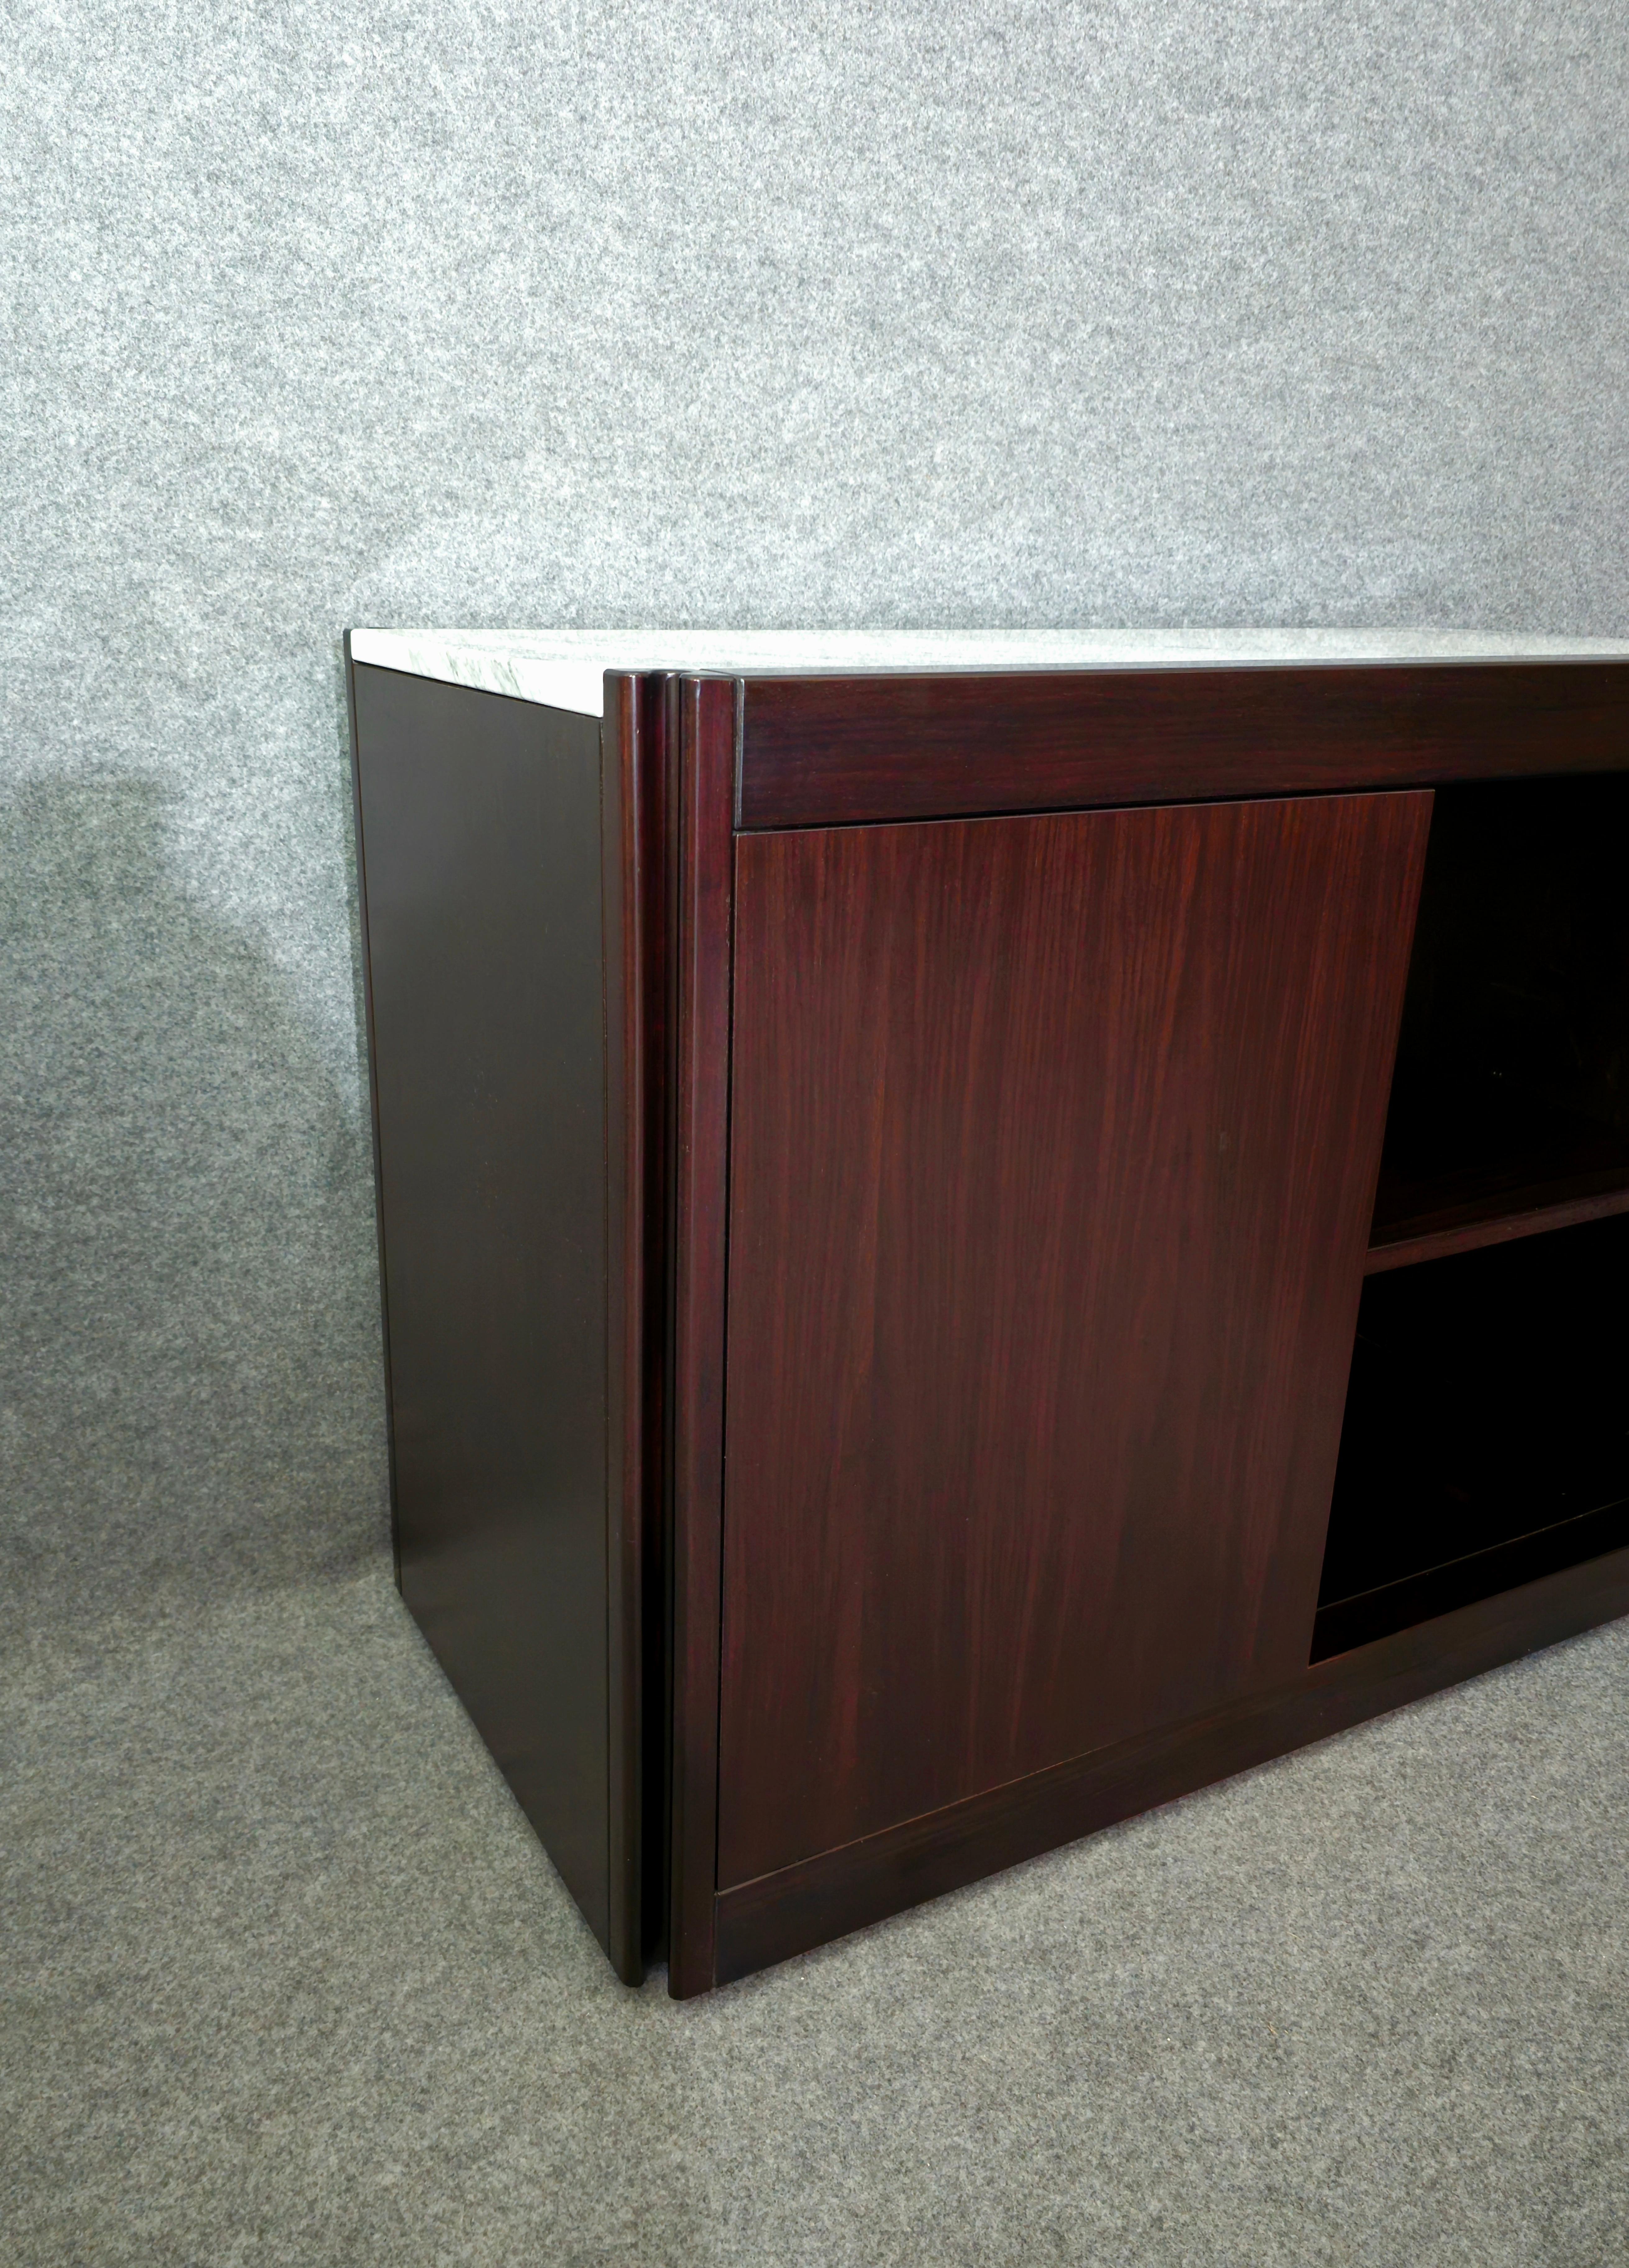 20th Century Buffet Credenza 4D Angelo Mangiarotti For Molteni Midcentury Design Italy 1960s  For Sale